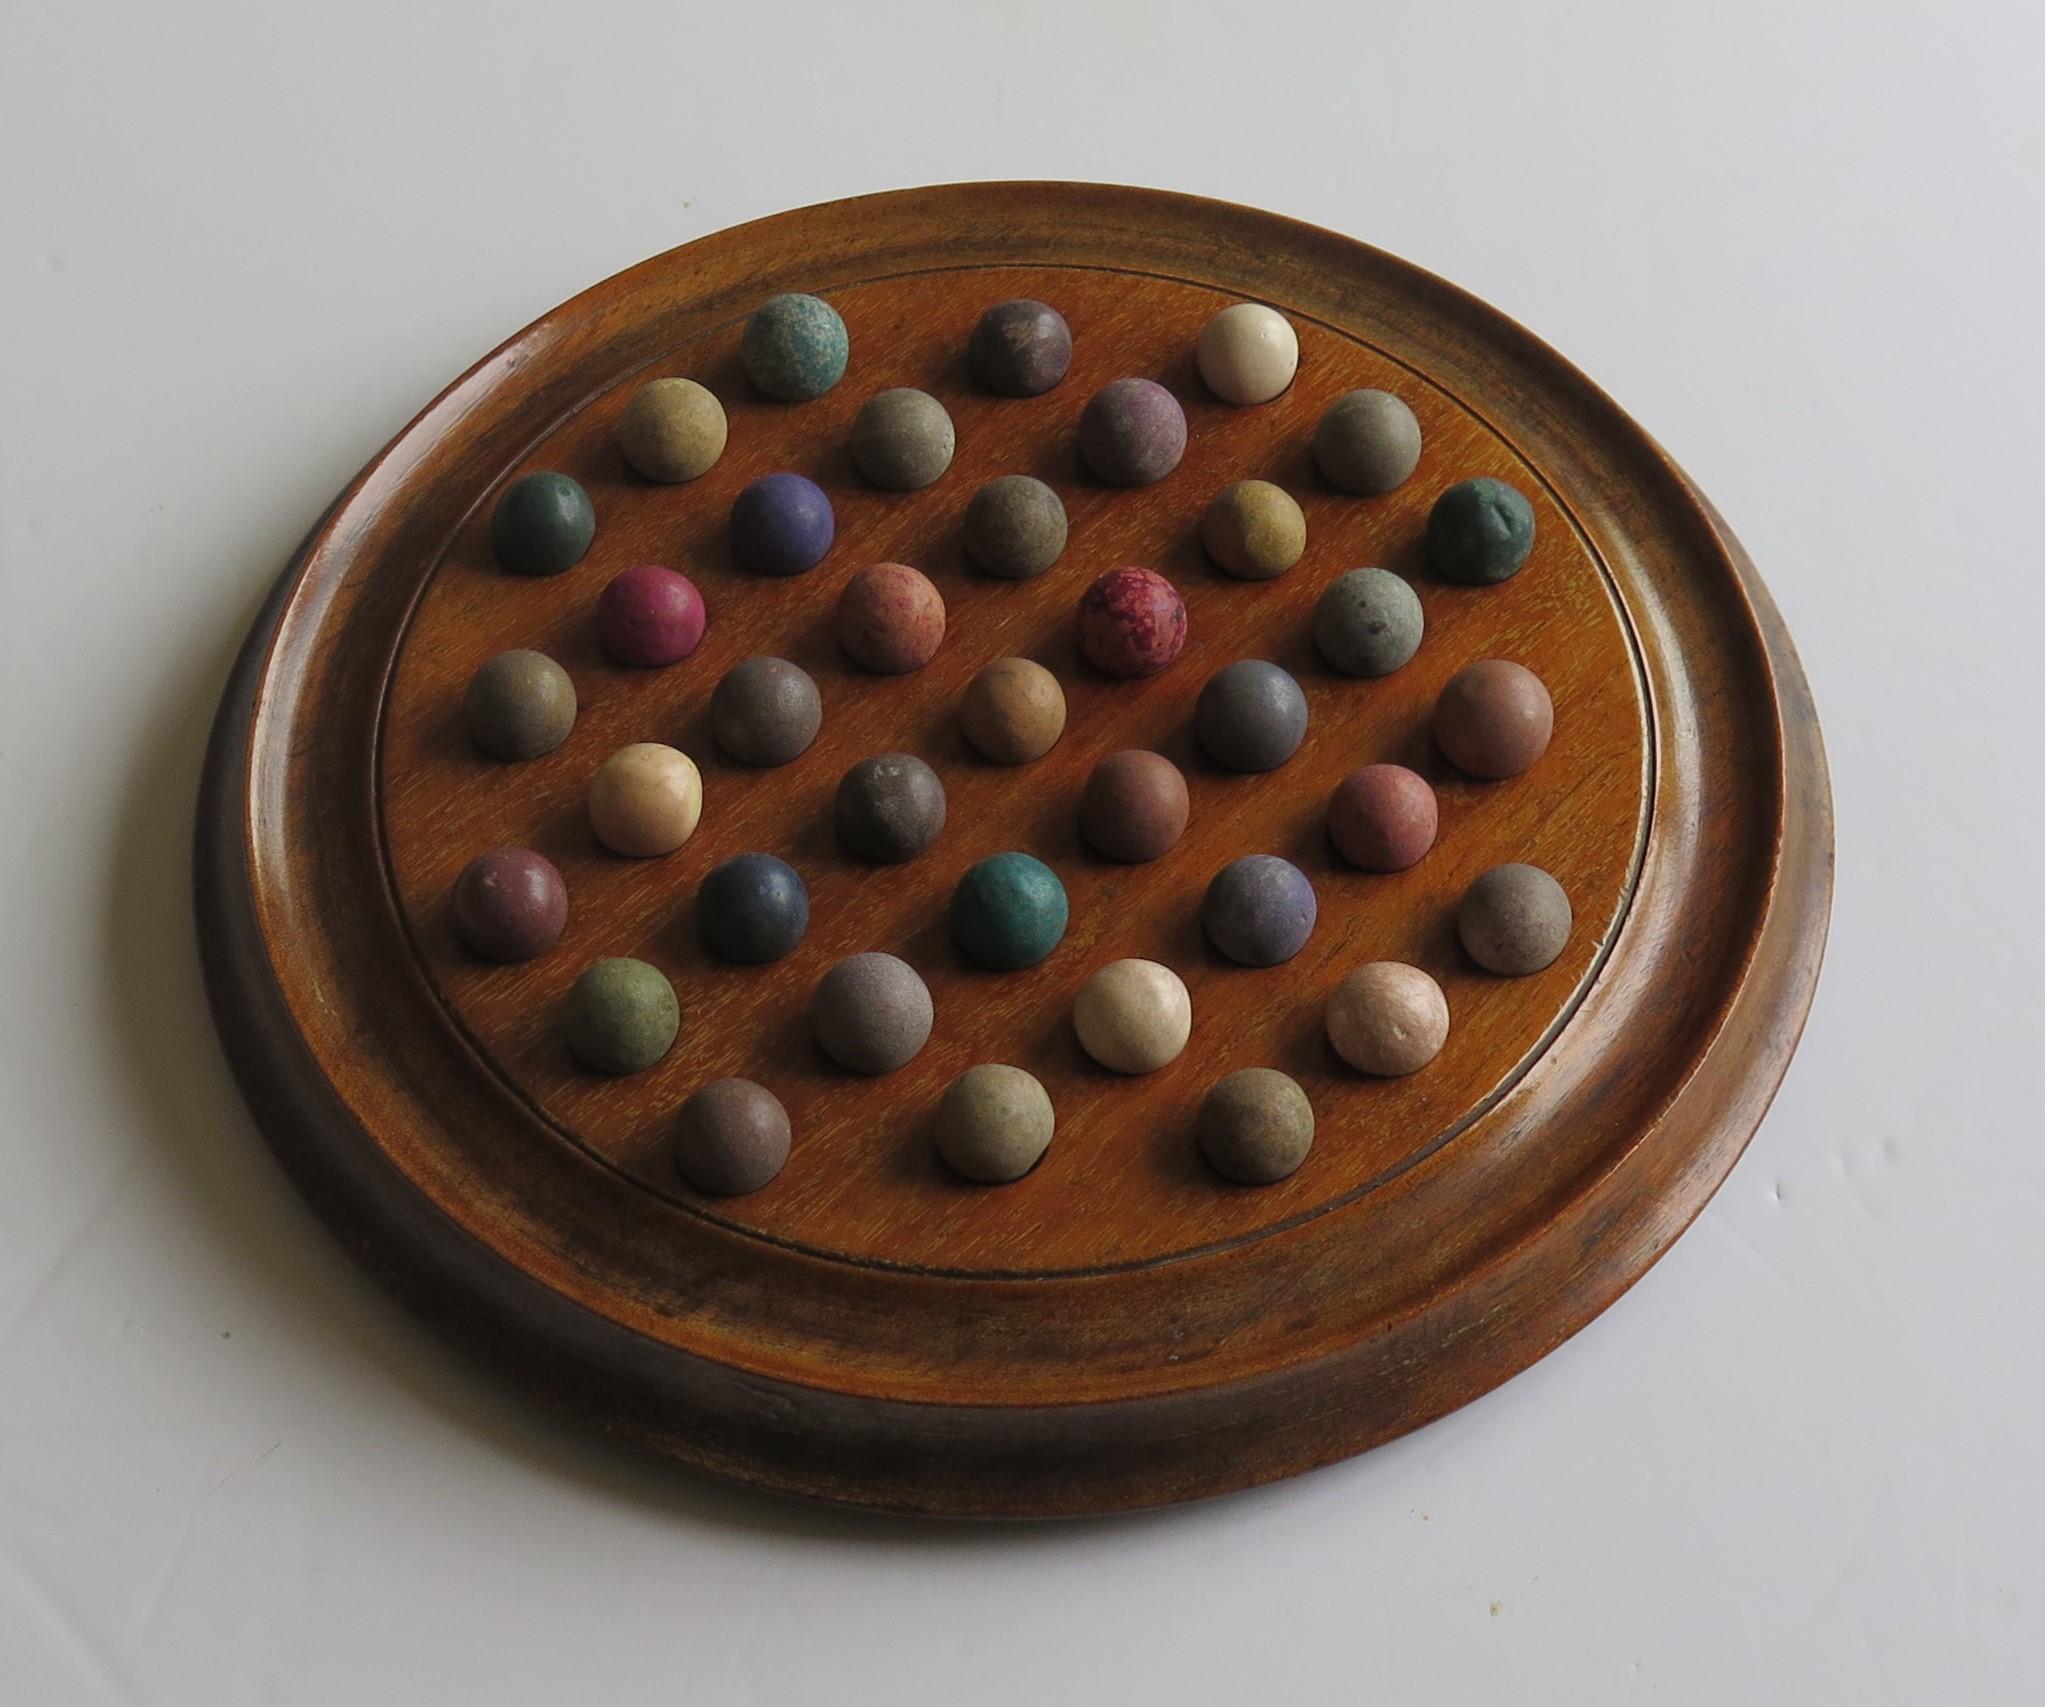 British Victorian Marble Solitaire Game Hardwood Board 37 Handmade Clay or Stone Marbles